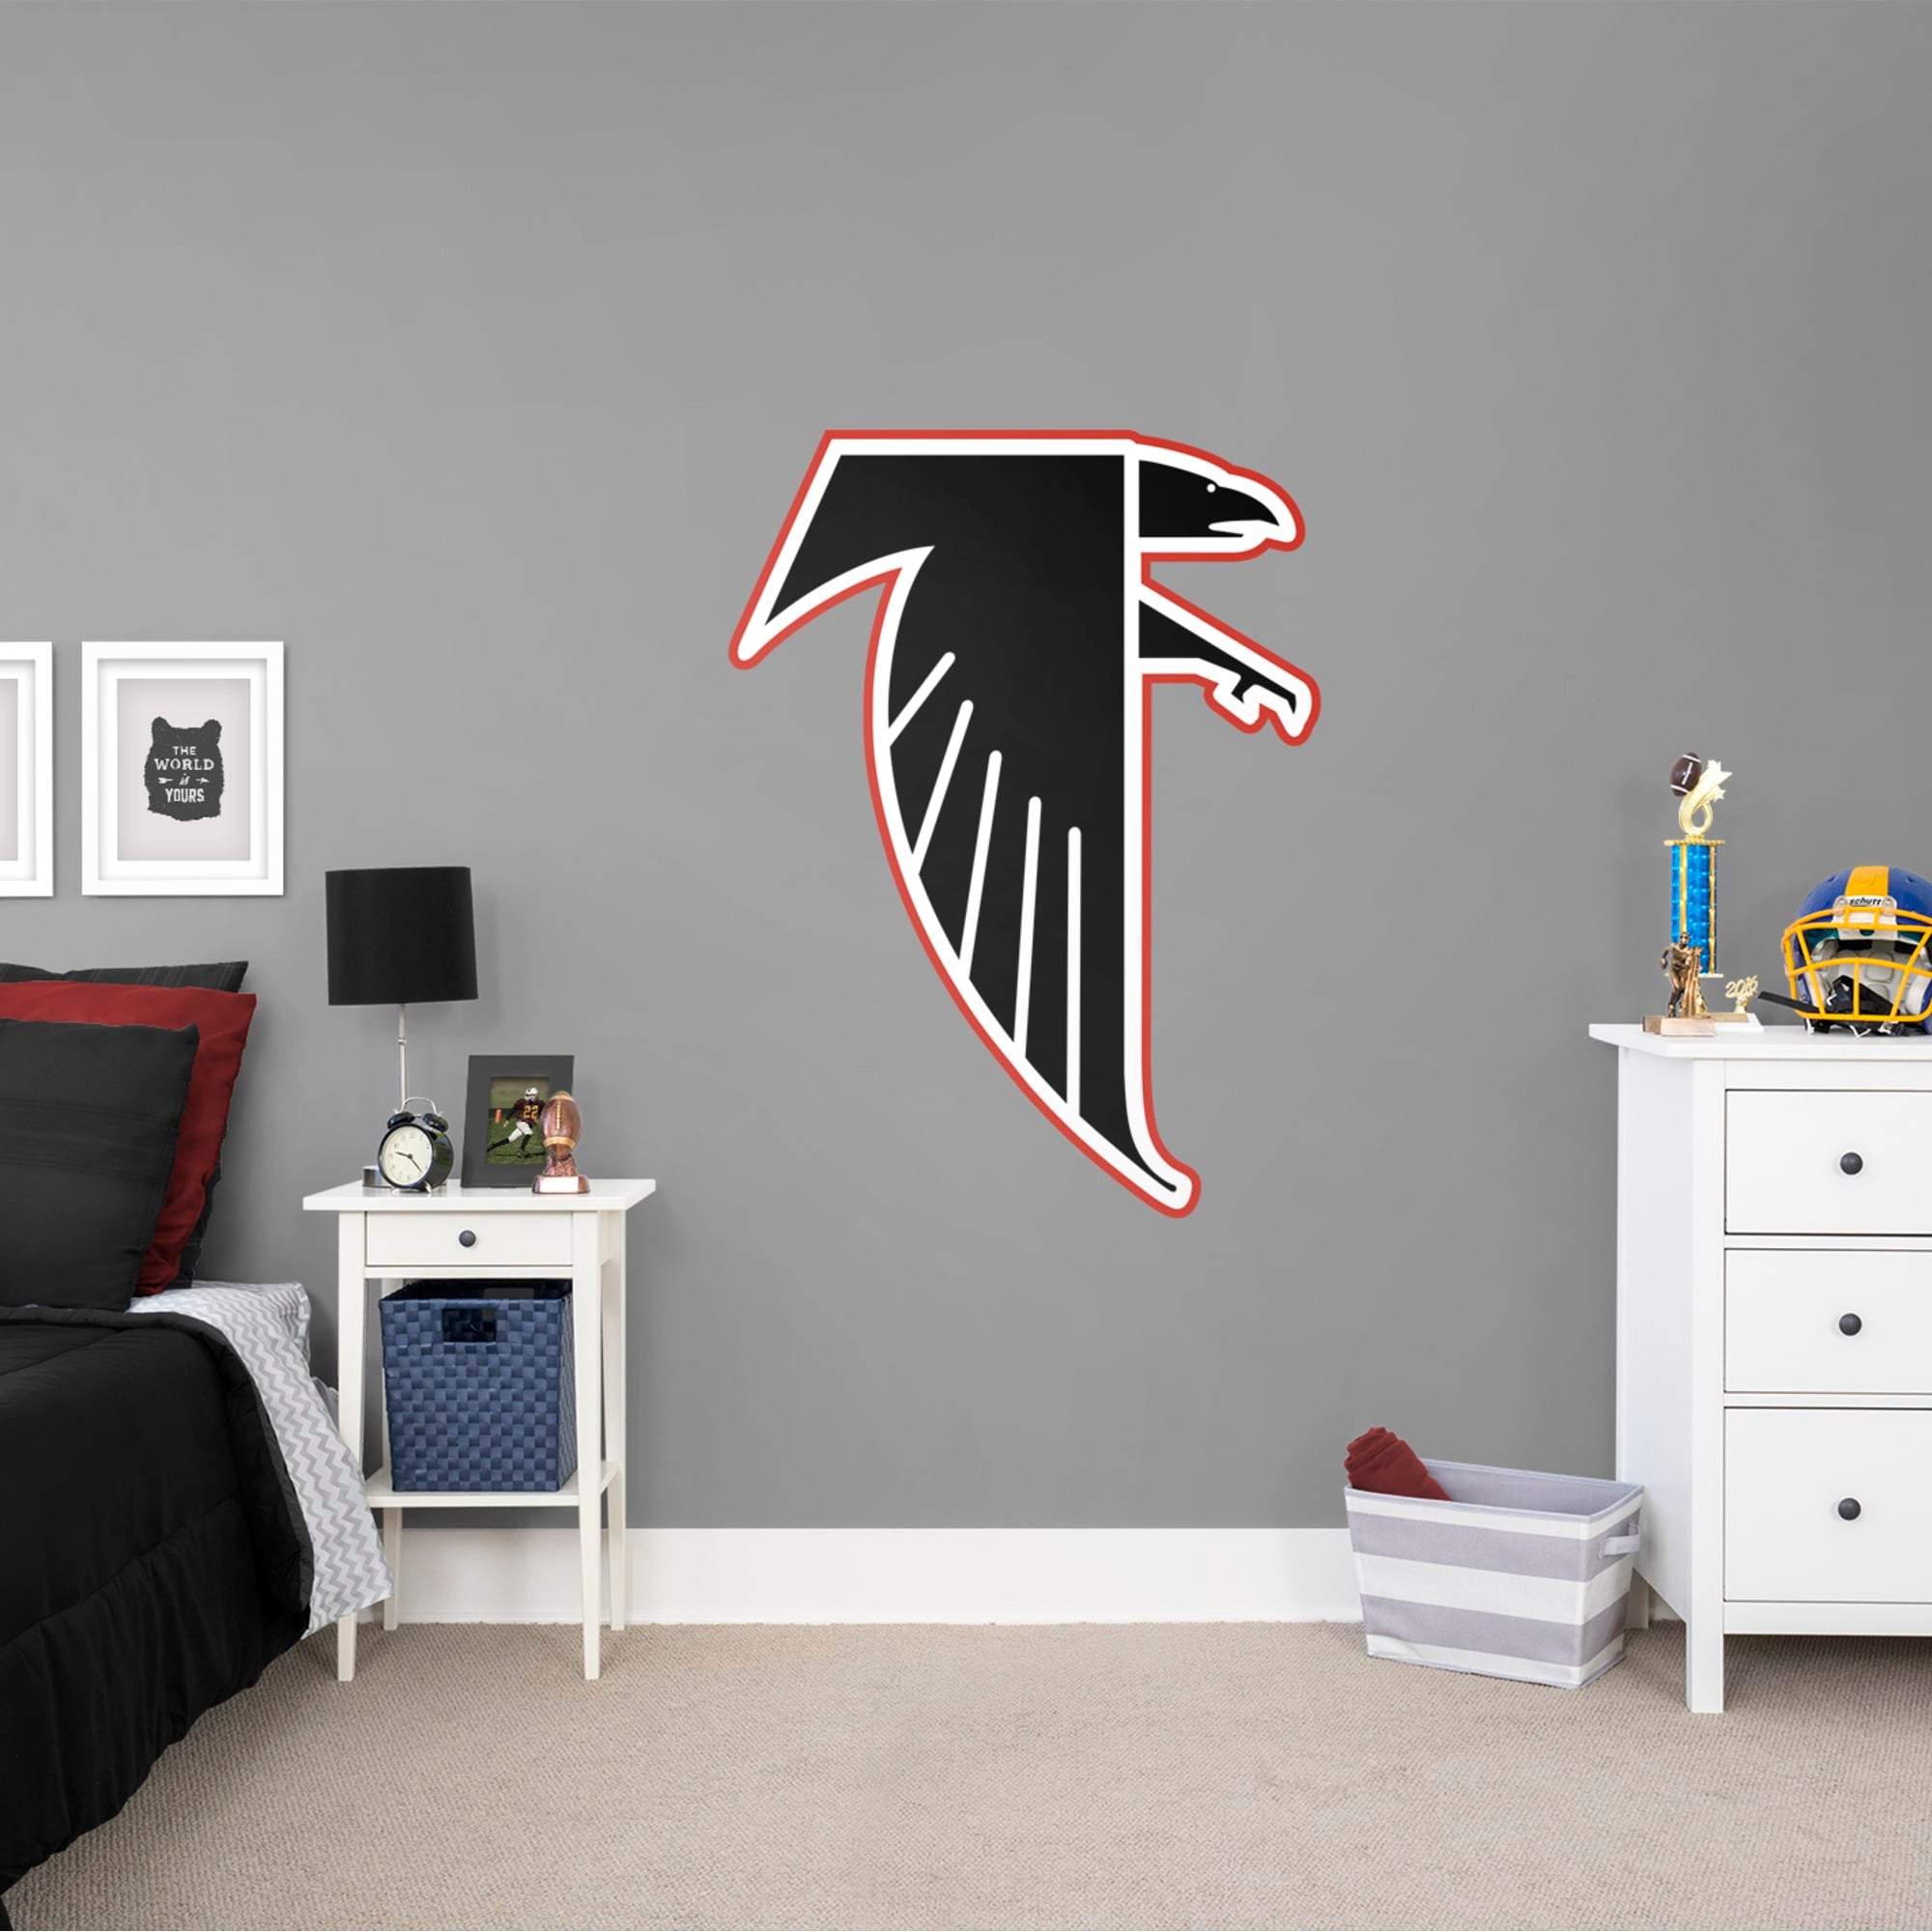 Atlanta Falcons: Classic Logo - Officially Licensed NFL Removable Wall Decal 38.0"W x 51.0"H by Fathead | Vinyl